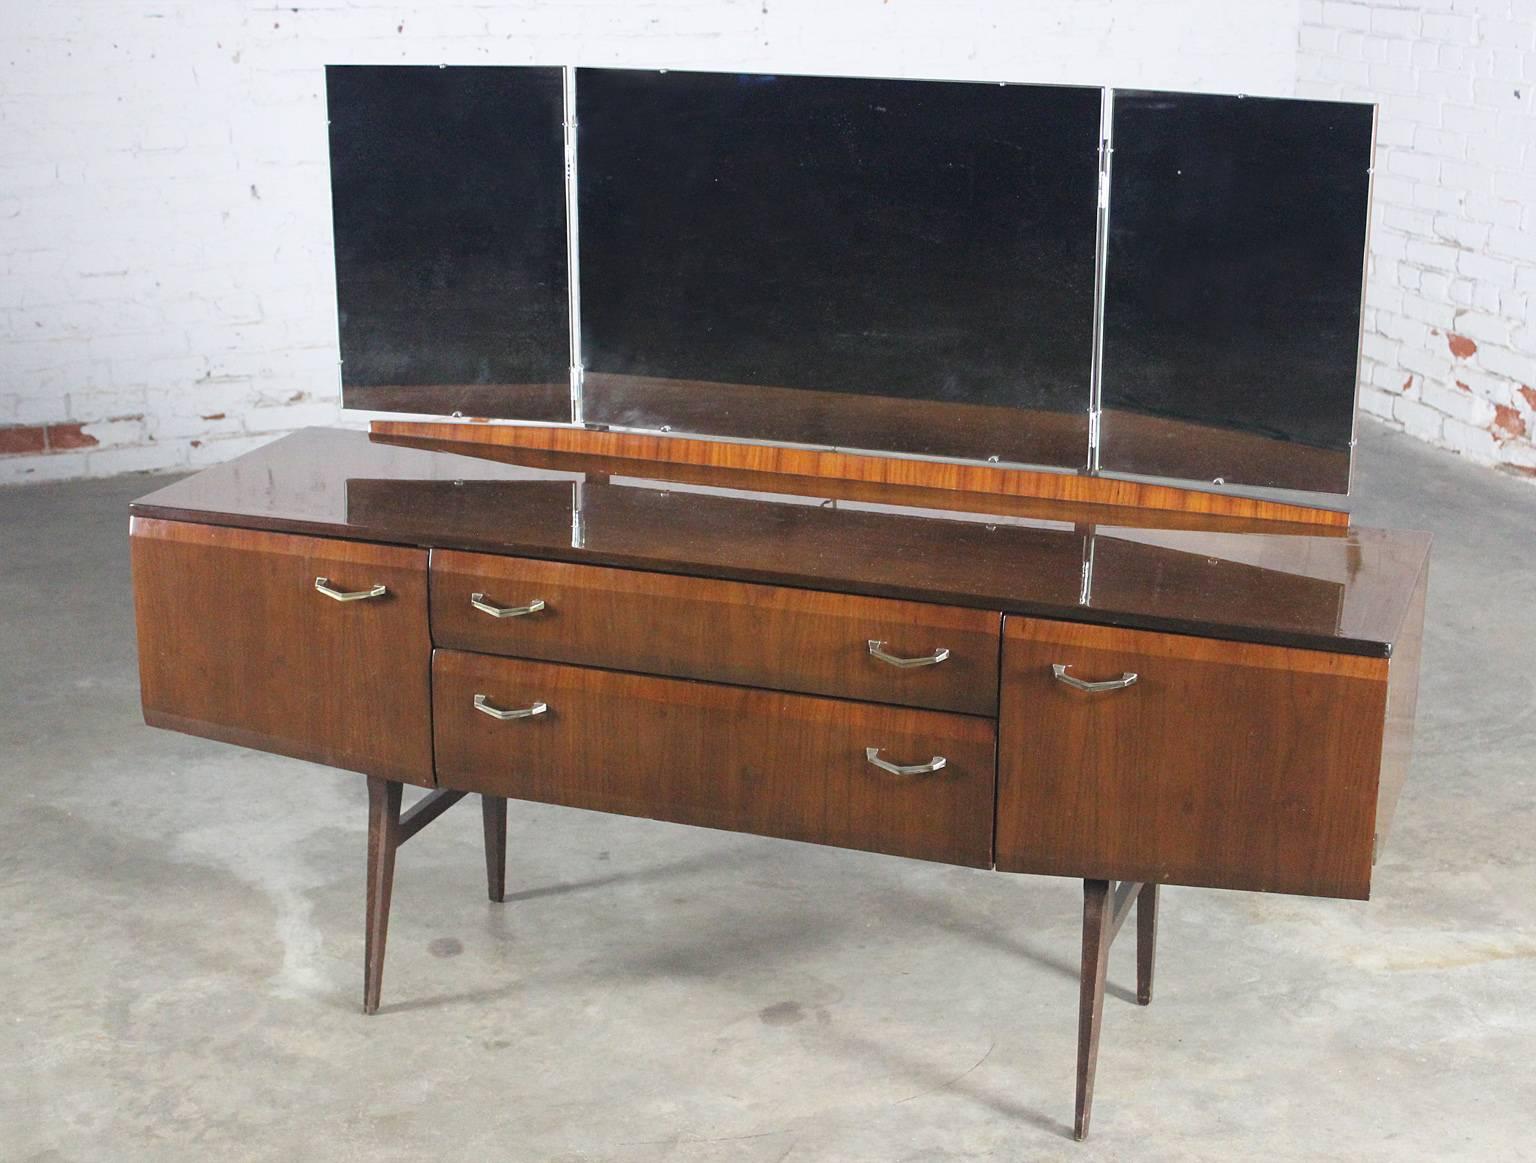 Lovely vanity by Meredew Furniture Manufacturers. Part of the Tola bedroom furniture and Meredew Design, 1962 line attributed to Alphons Loebenstein. It is in great vintage condition. See long description for details.

Oh La La!!! This is an